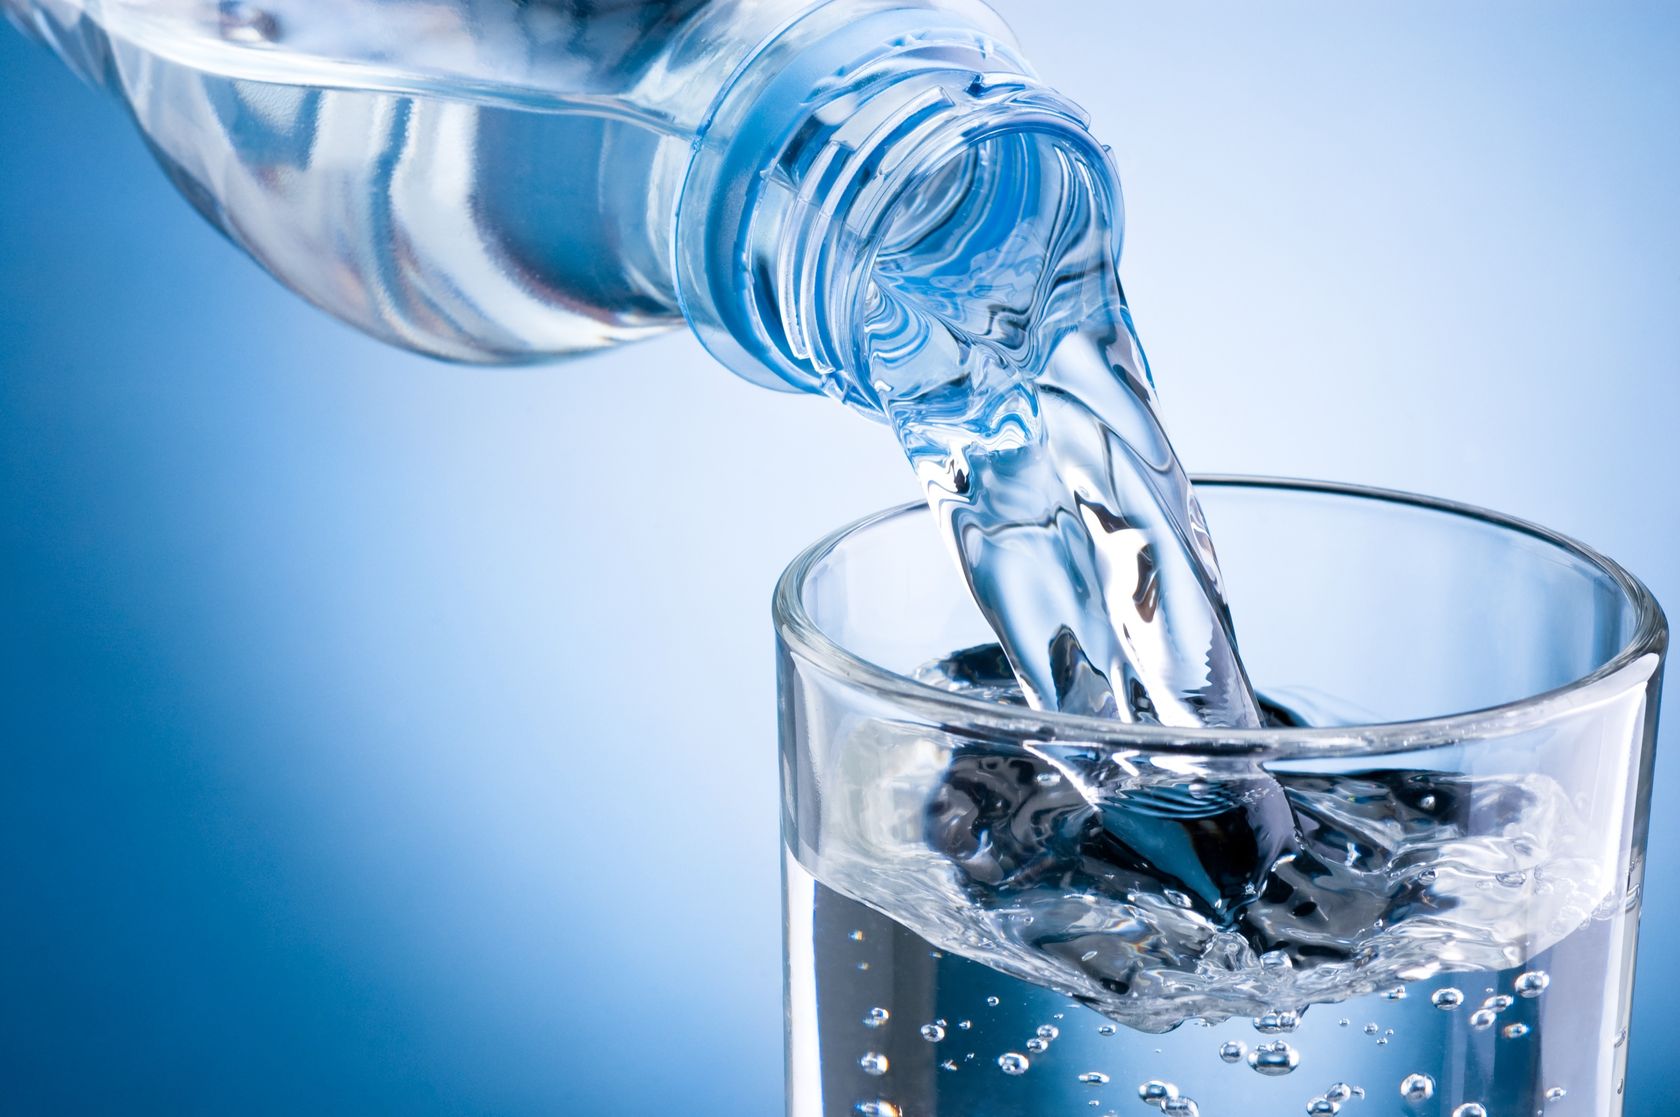 Take care of your body and replenish with plenty of water